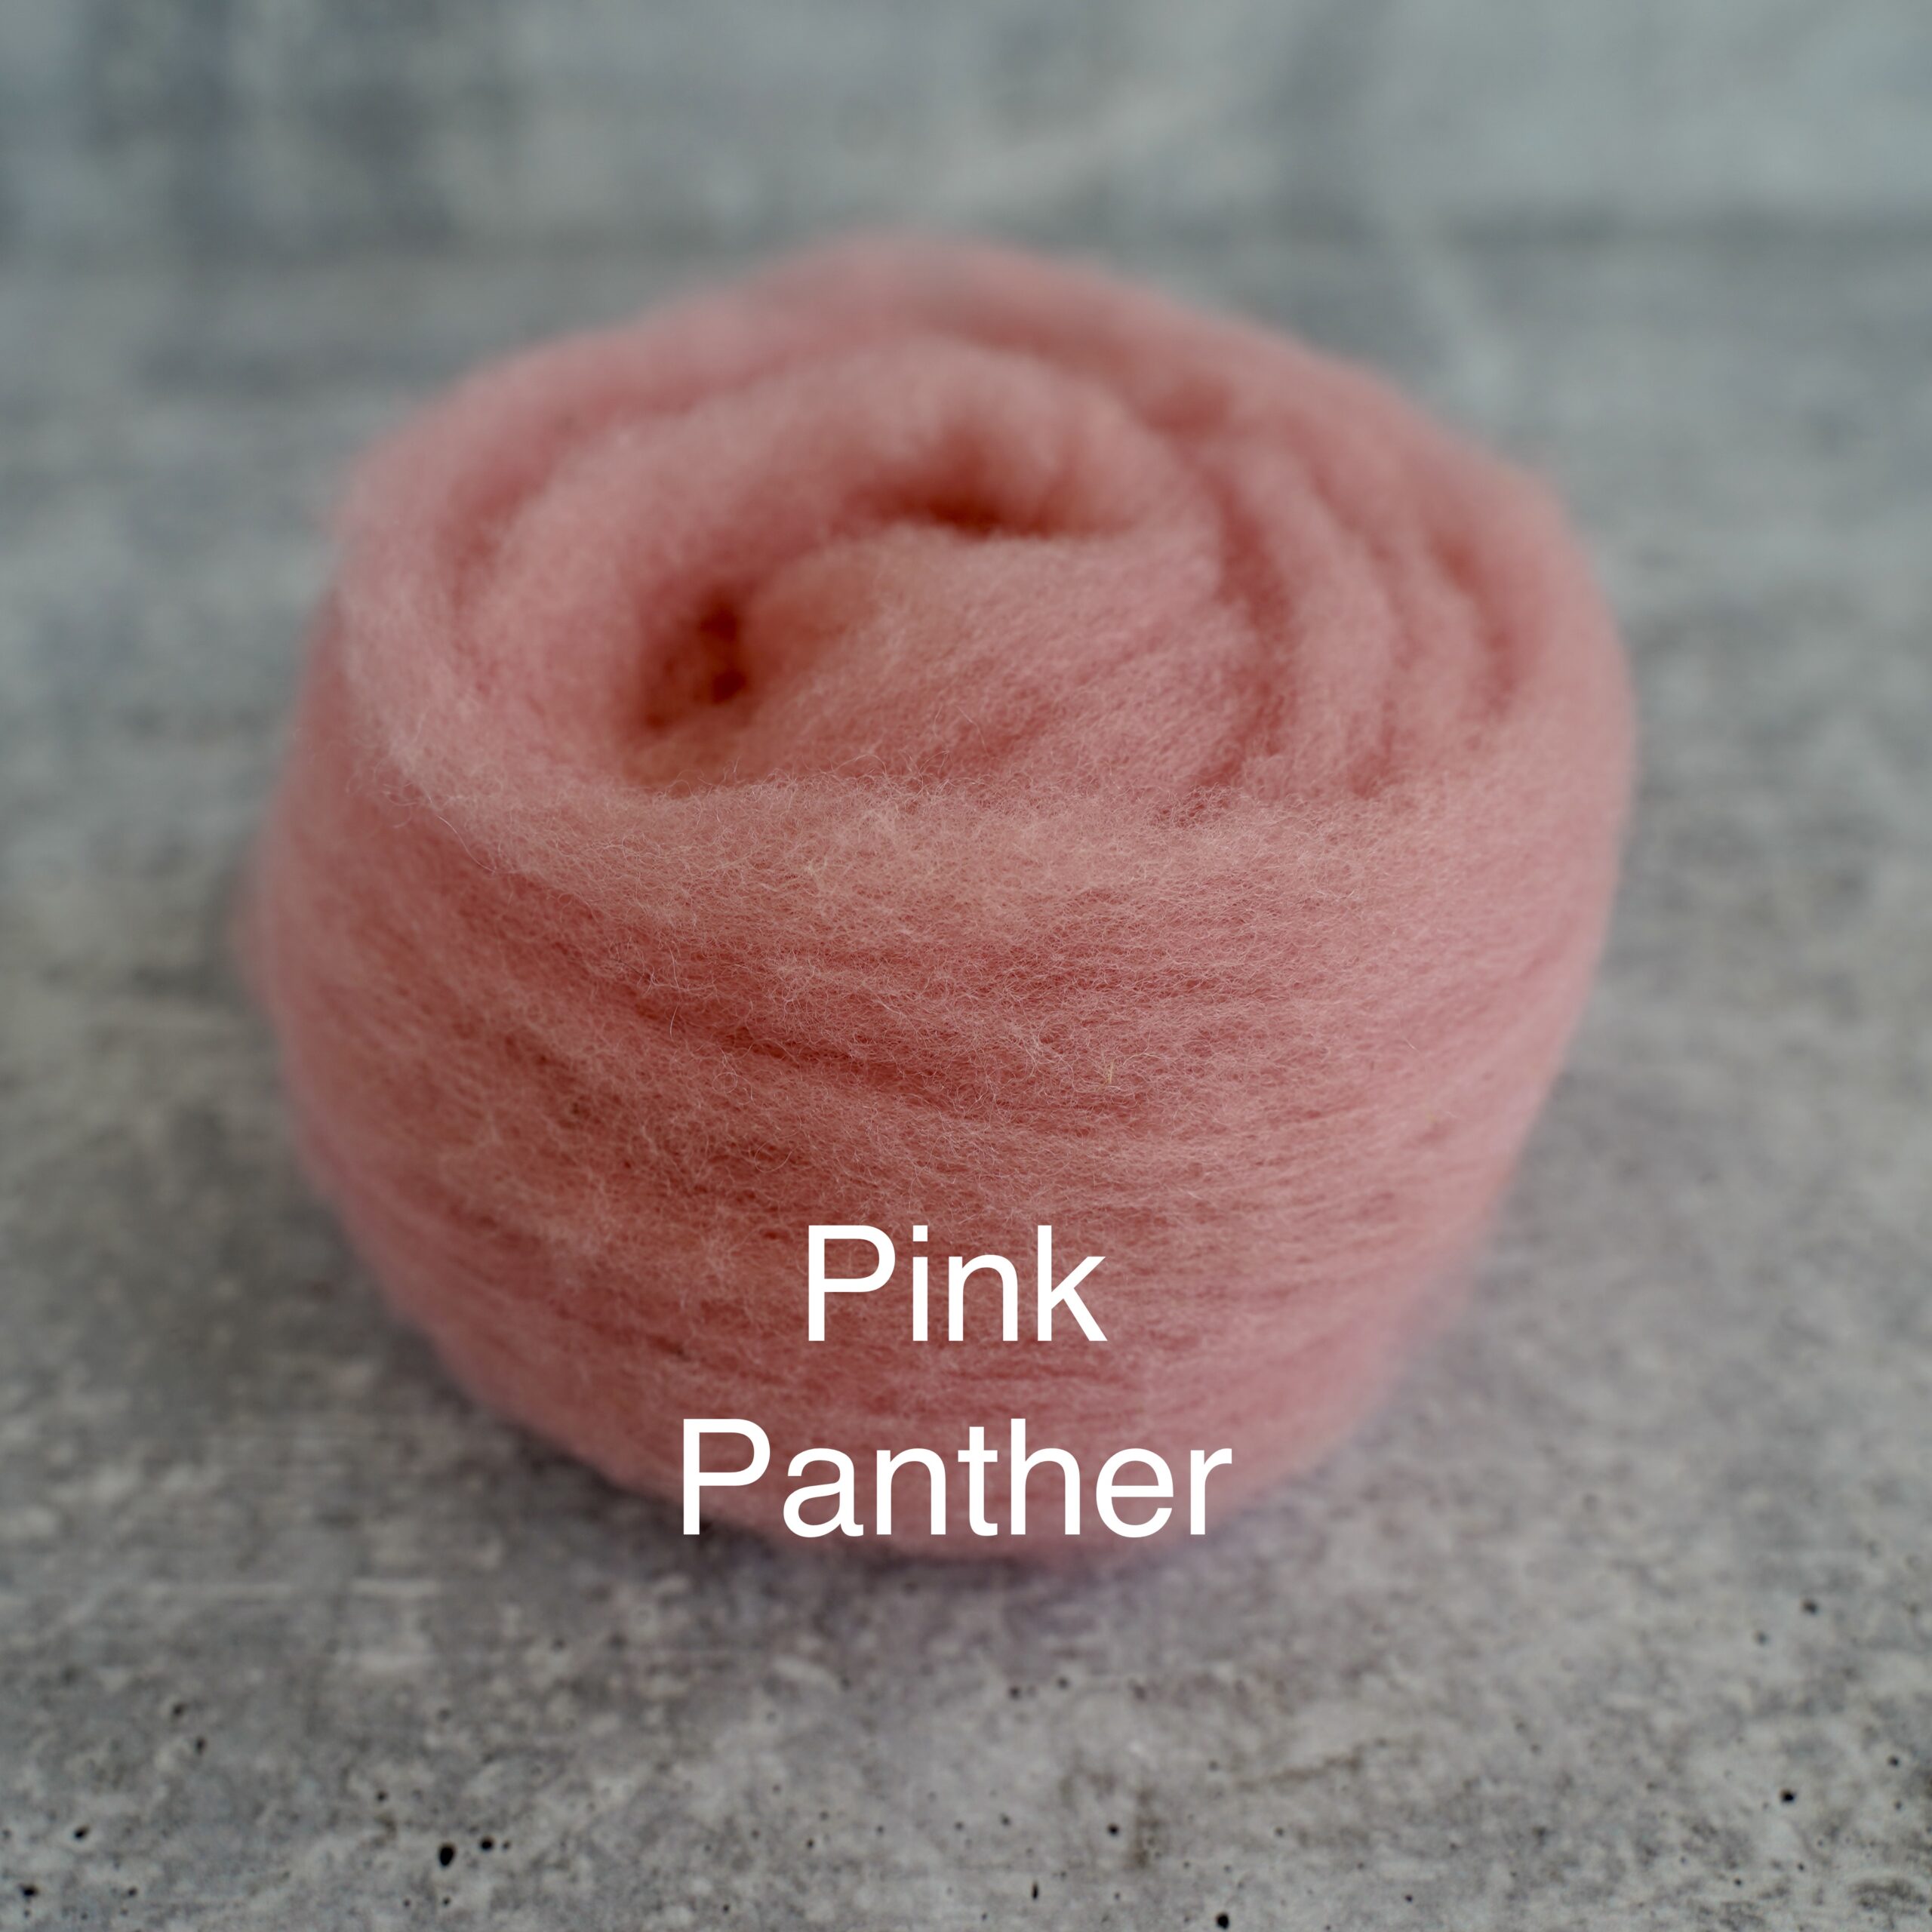 Pink-Red Colors of Wool for Needle Felting